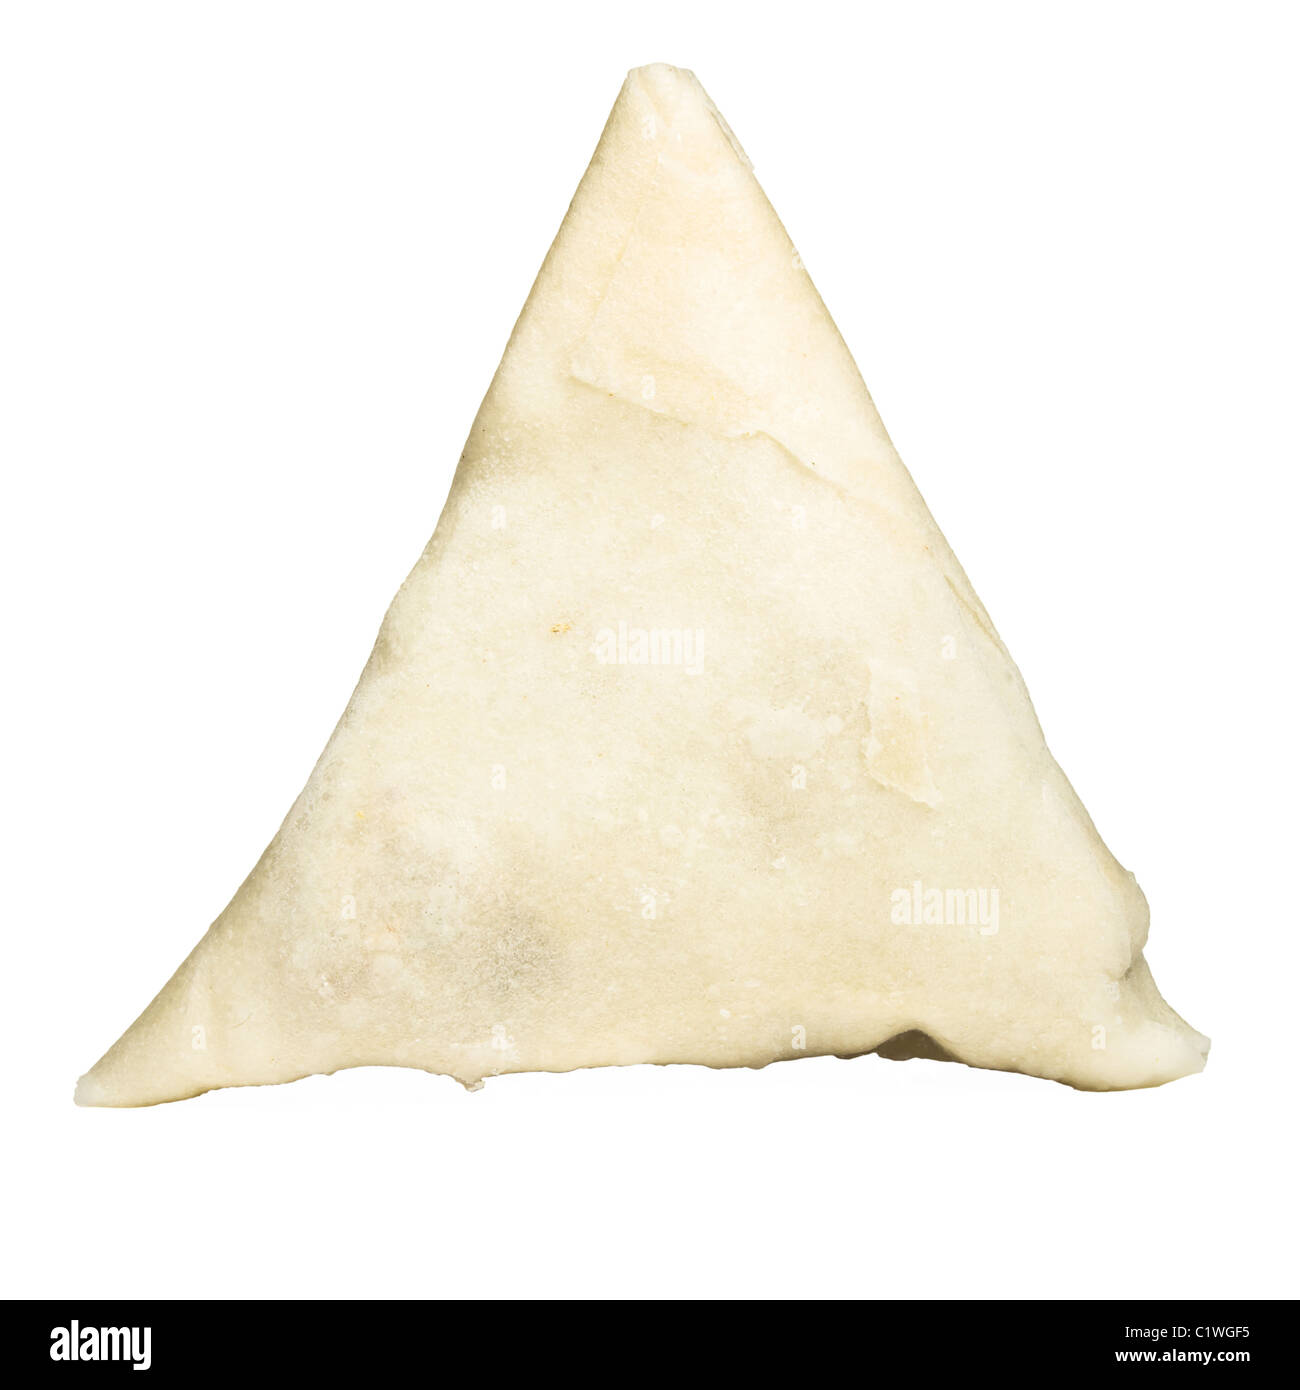 Uncooked Frozen Samosa isolated on white prior to cooking. Stock Photo